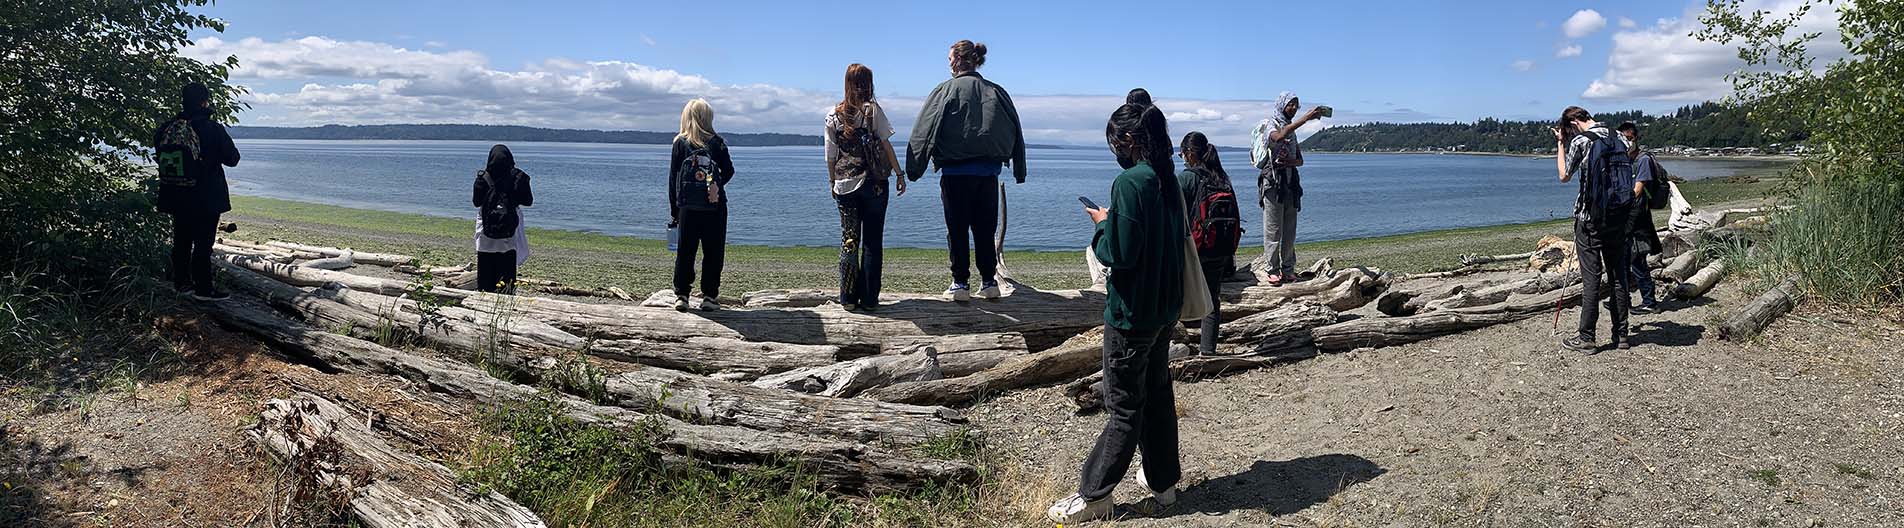 Educational outing at Seahurst Park